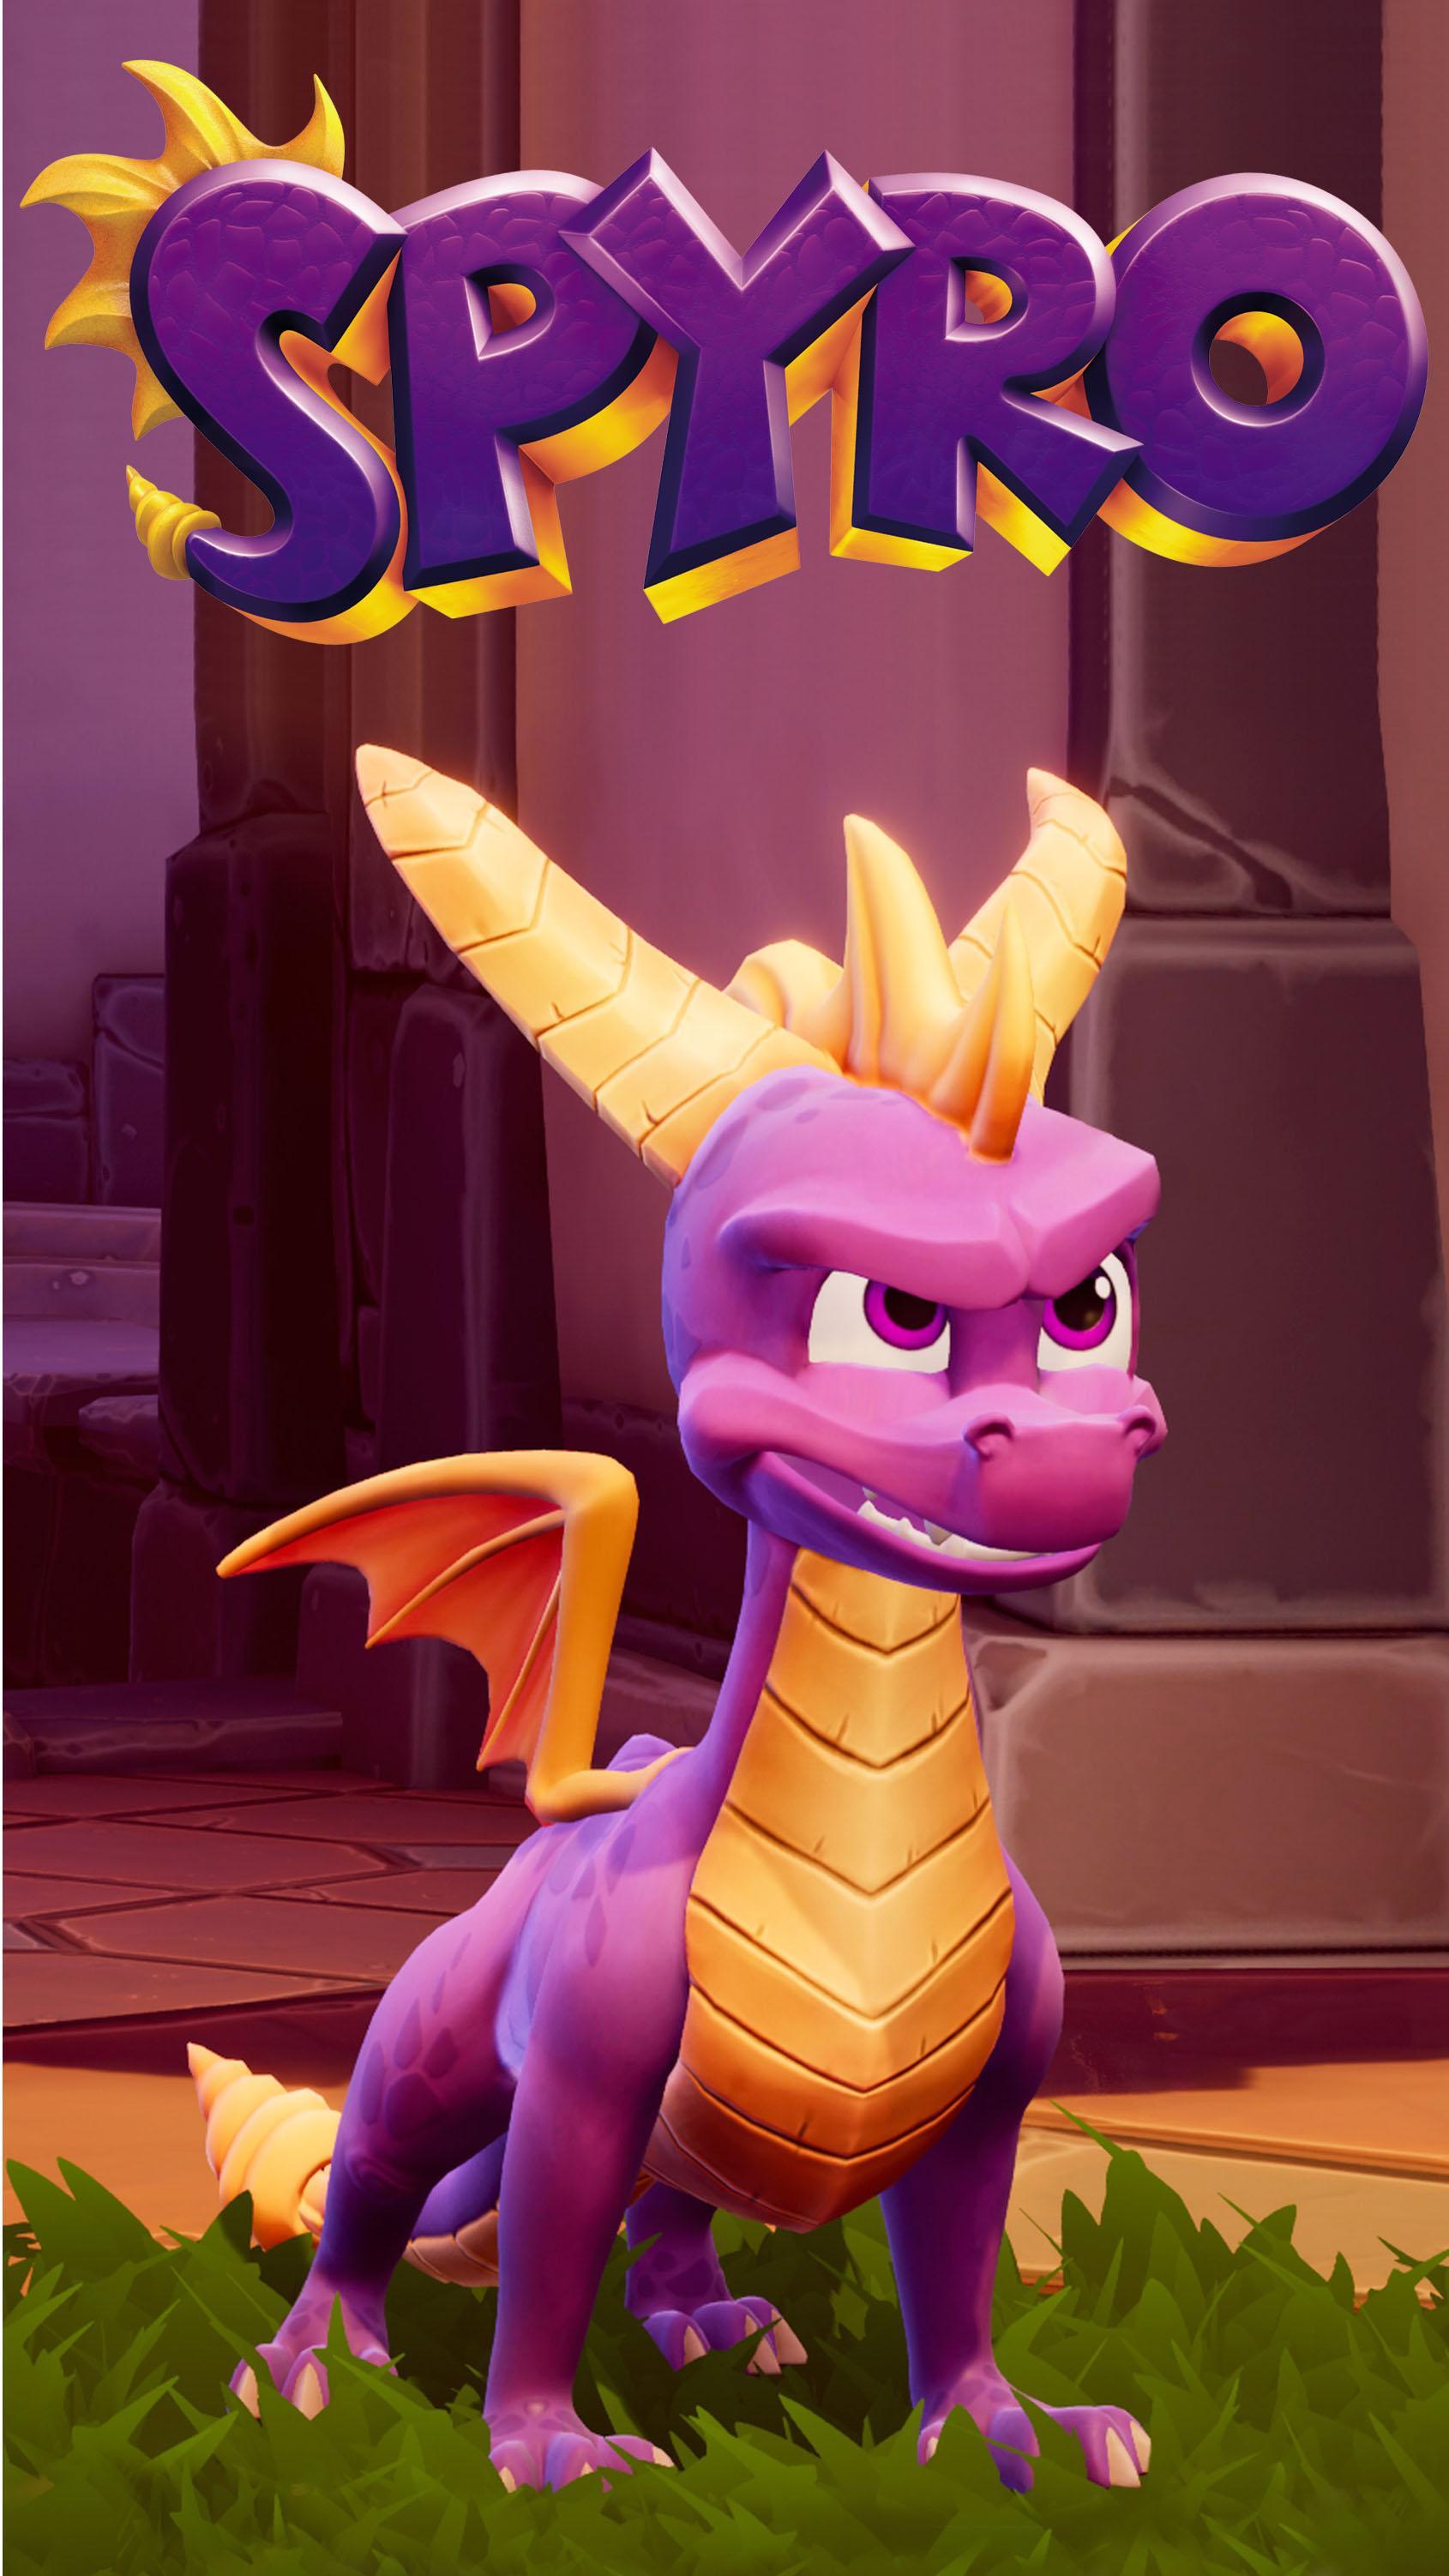 Download Spyro Reignited Trilogy wallpapers for mobile phone free Spyro  Reignited Trilogy HD pictures